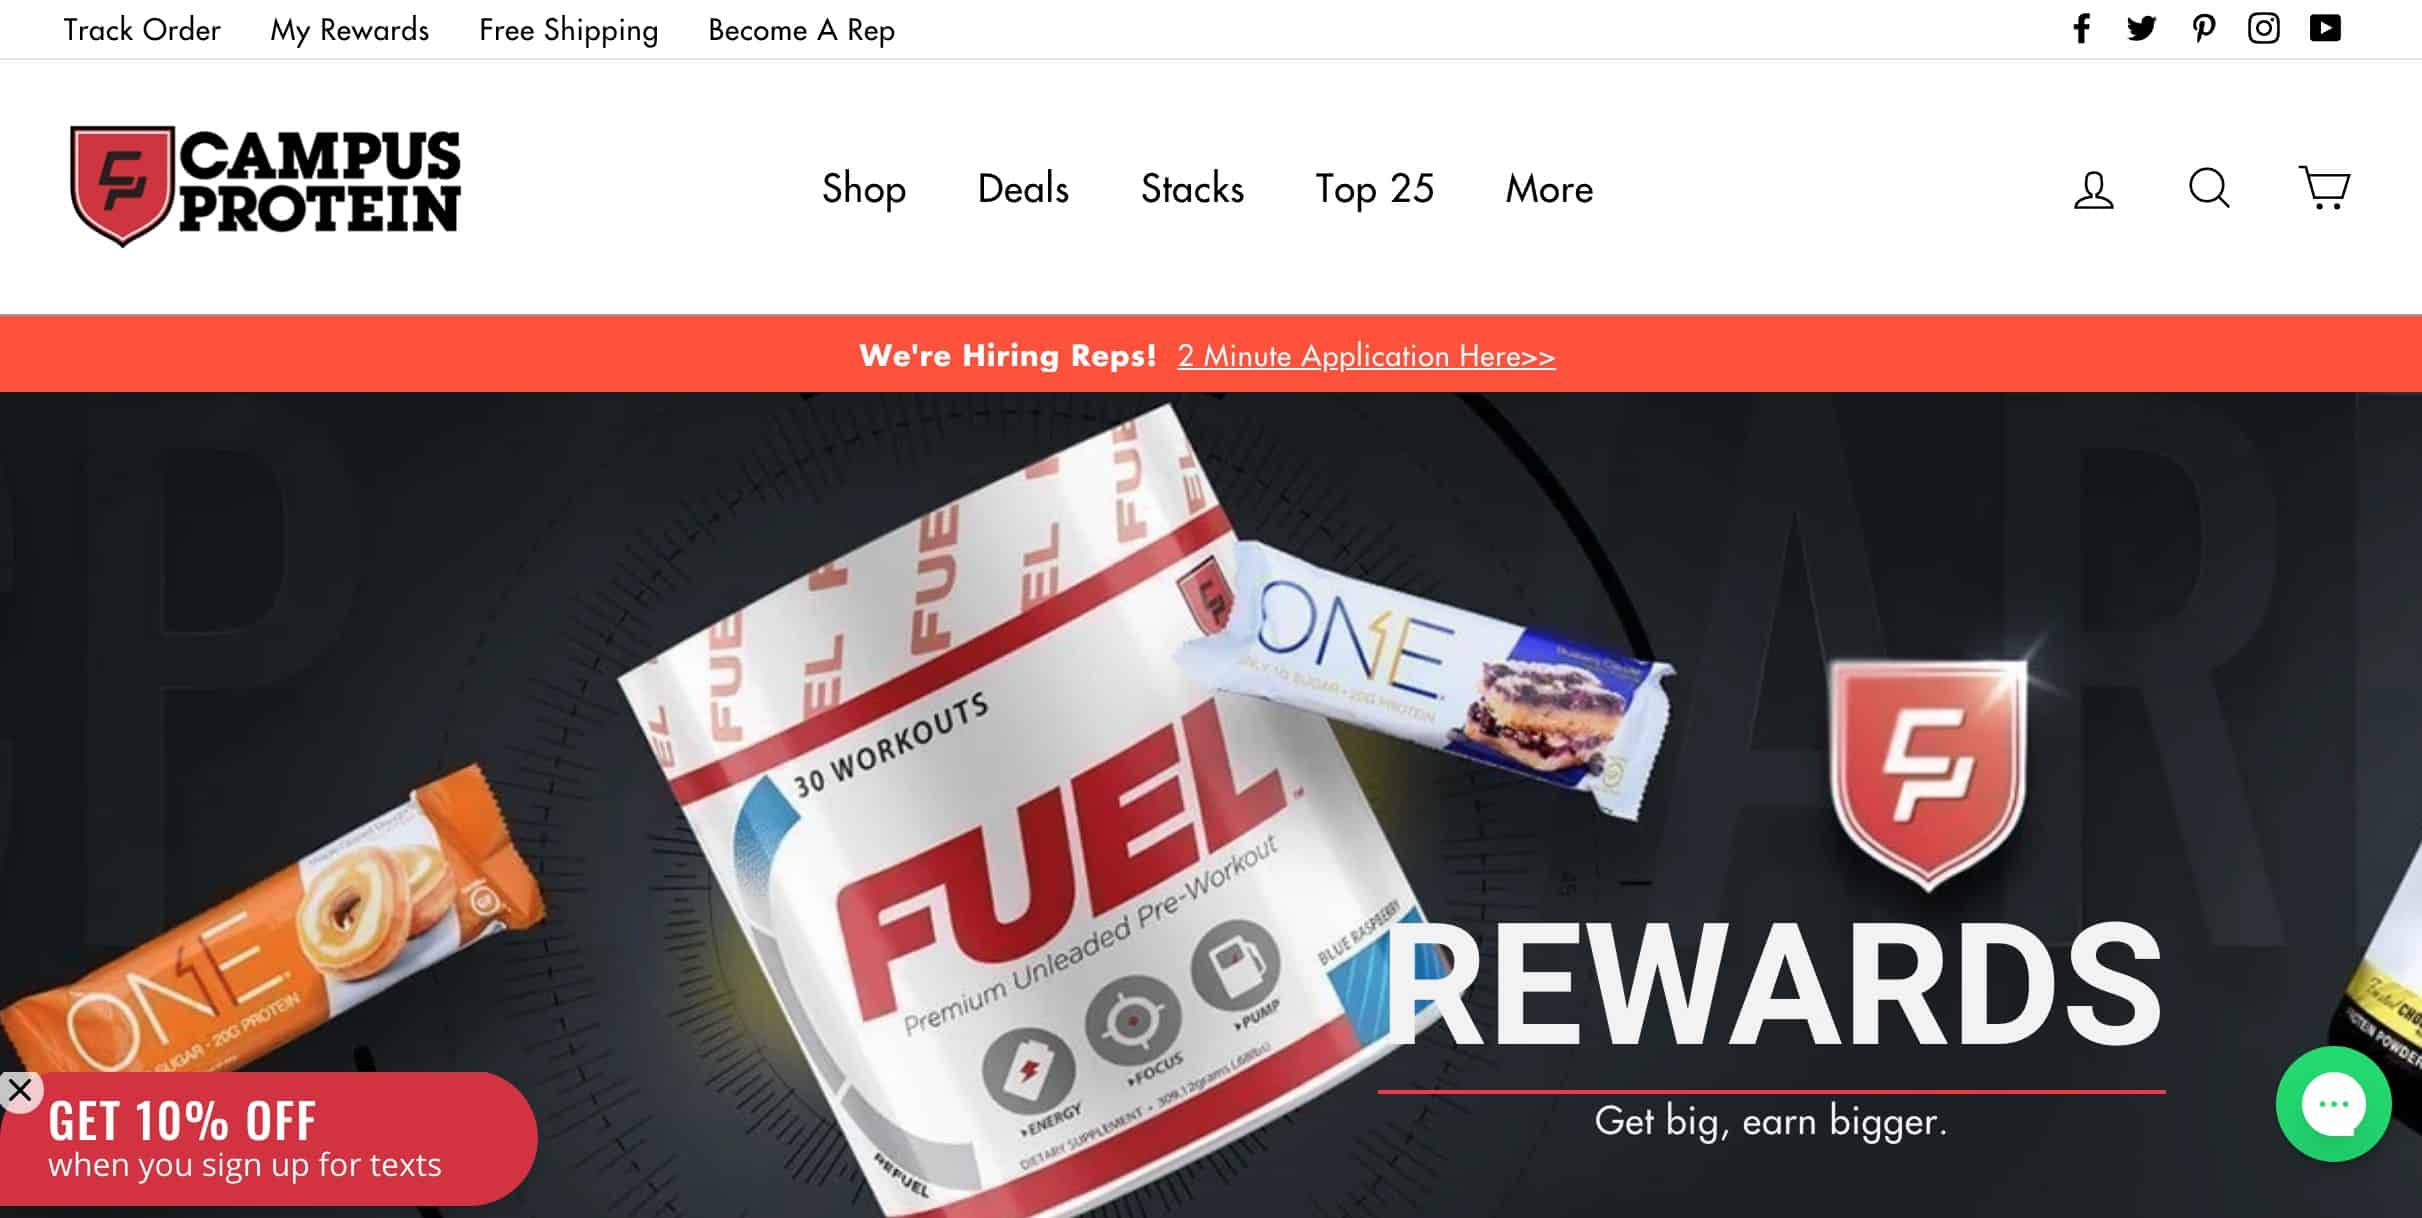 ecommerce live chat campus protein rewards page